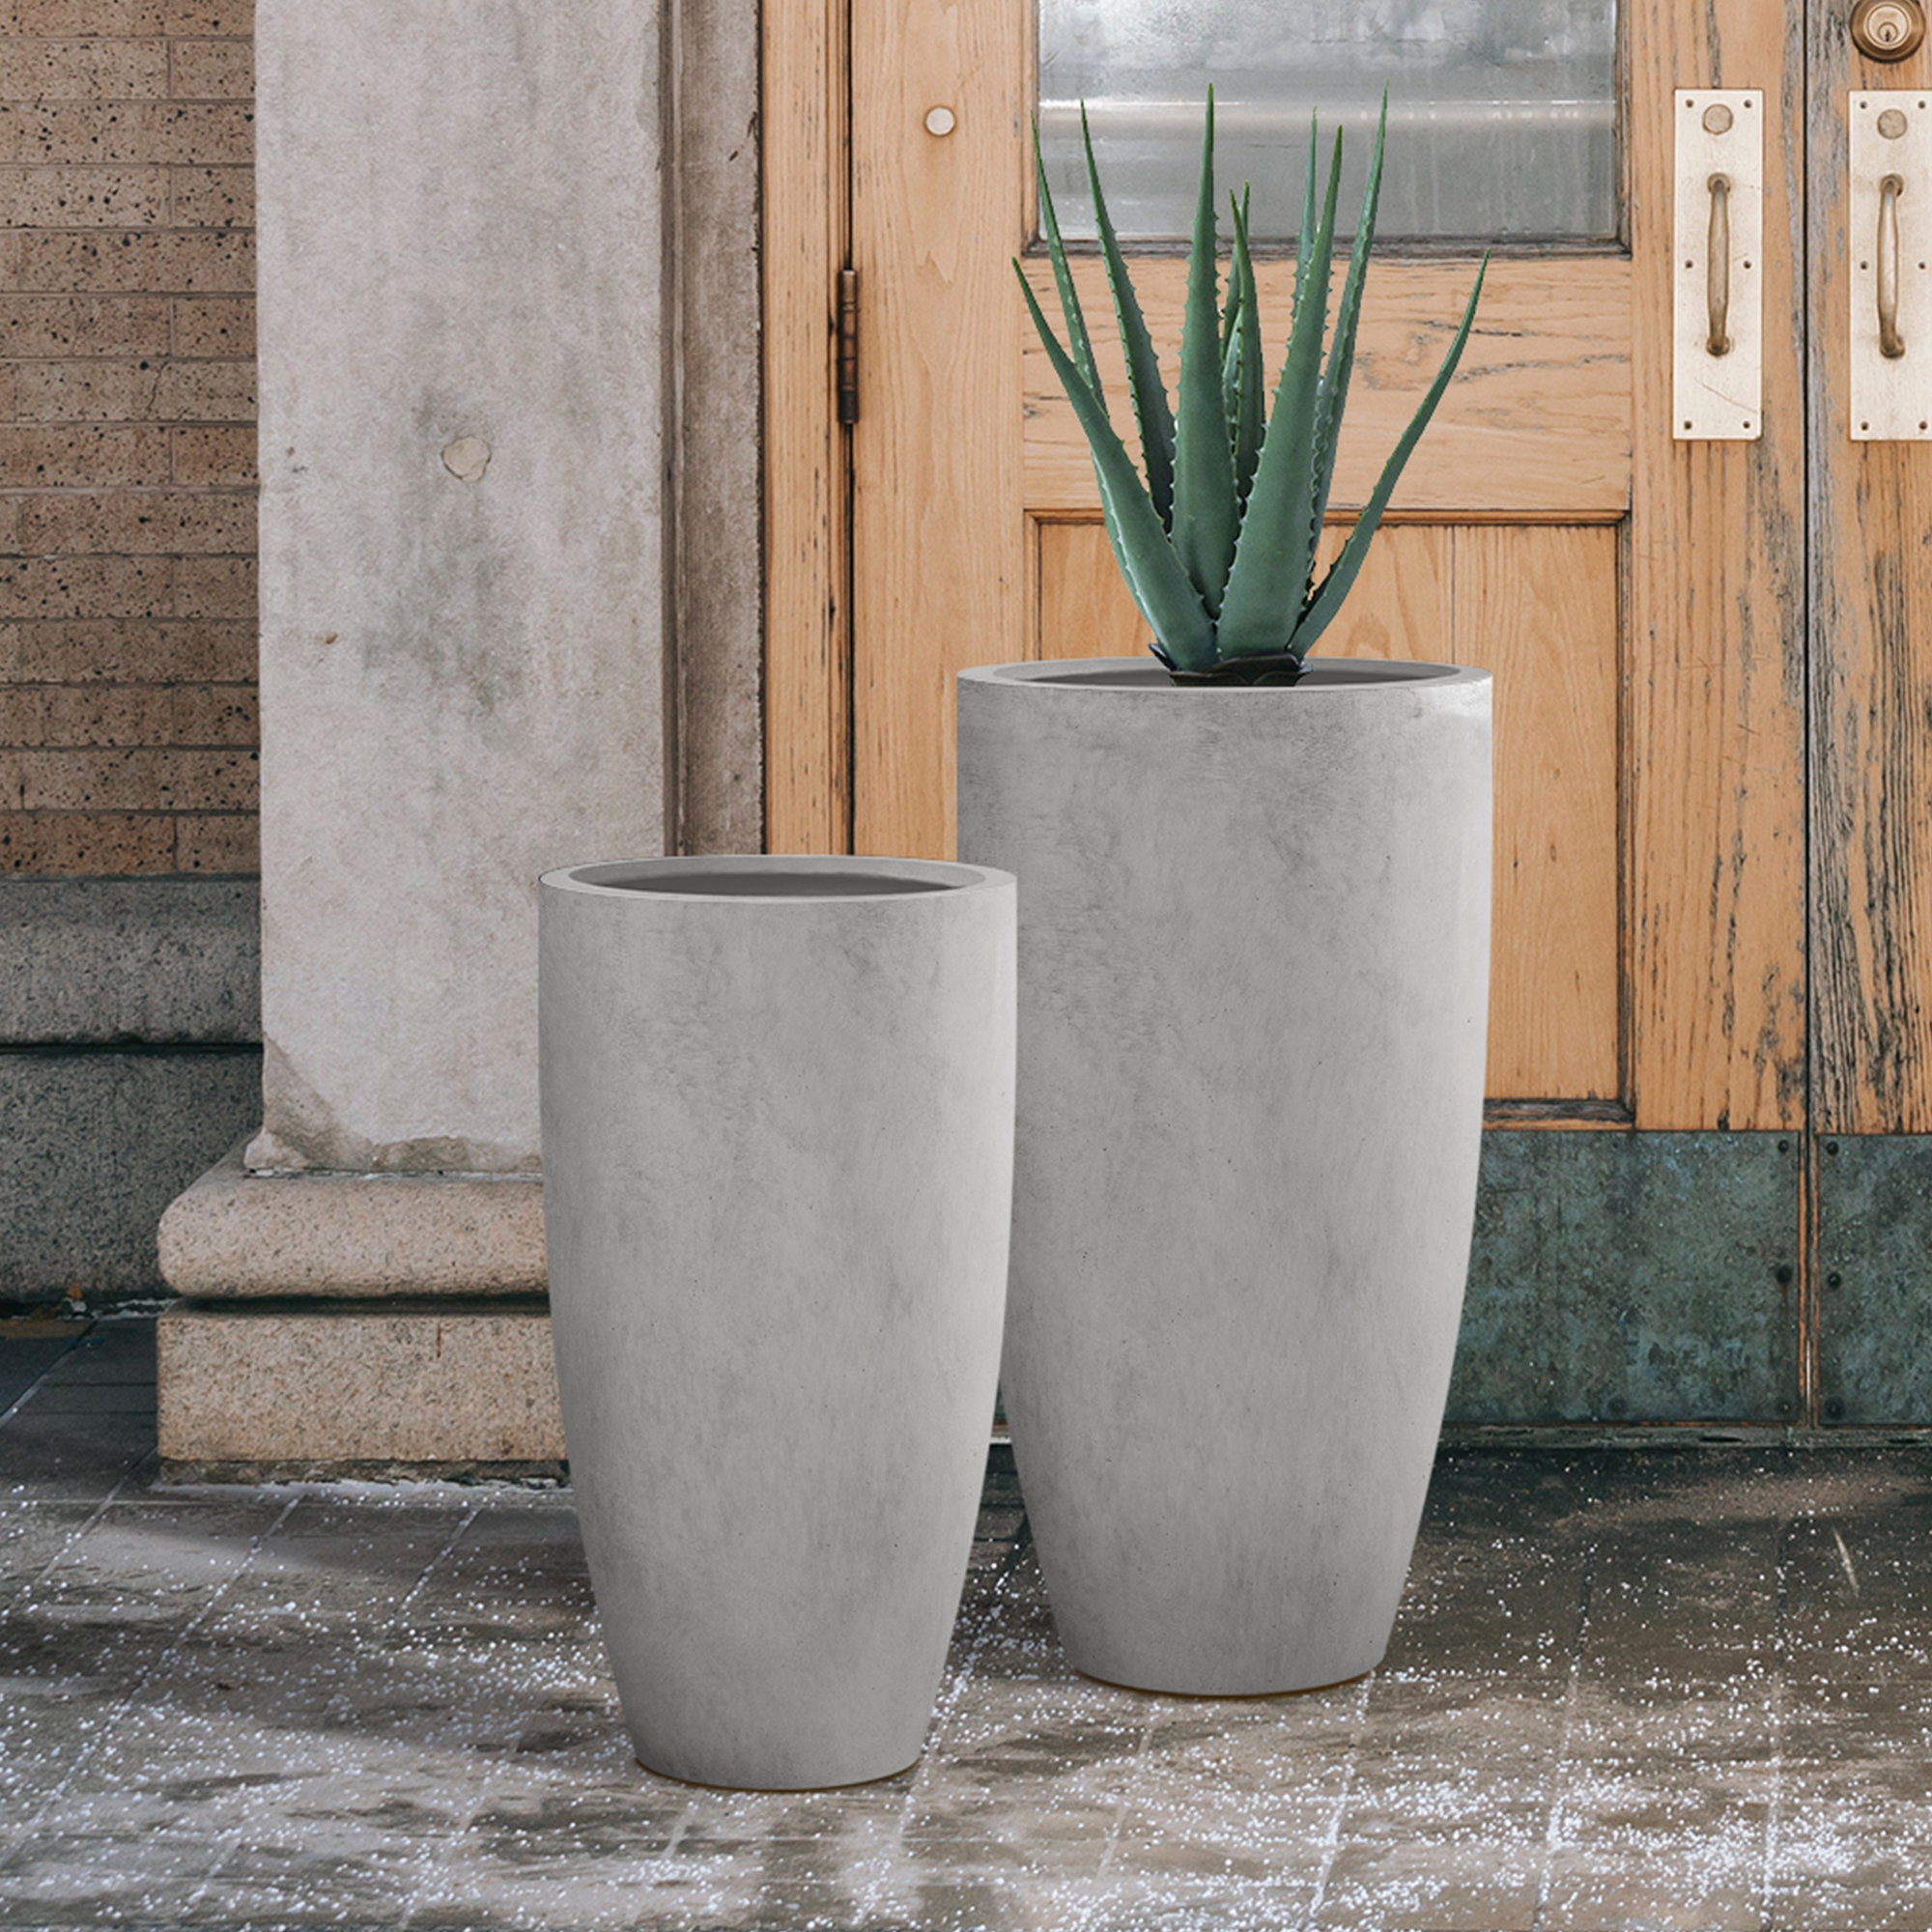 Artisan Hand Painted Terracotta Outdoor Planters | Pottery Barn